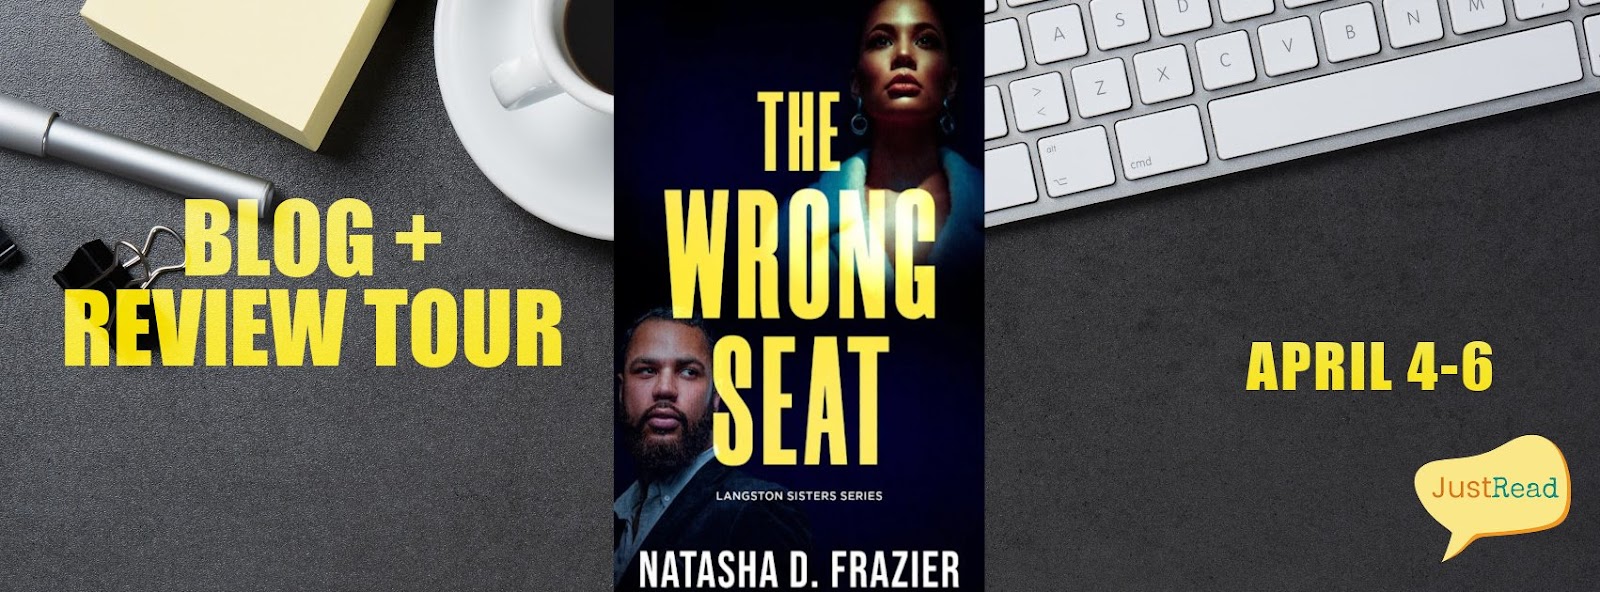 The Wrong Seat JustRead Blog + Review Tour